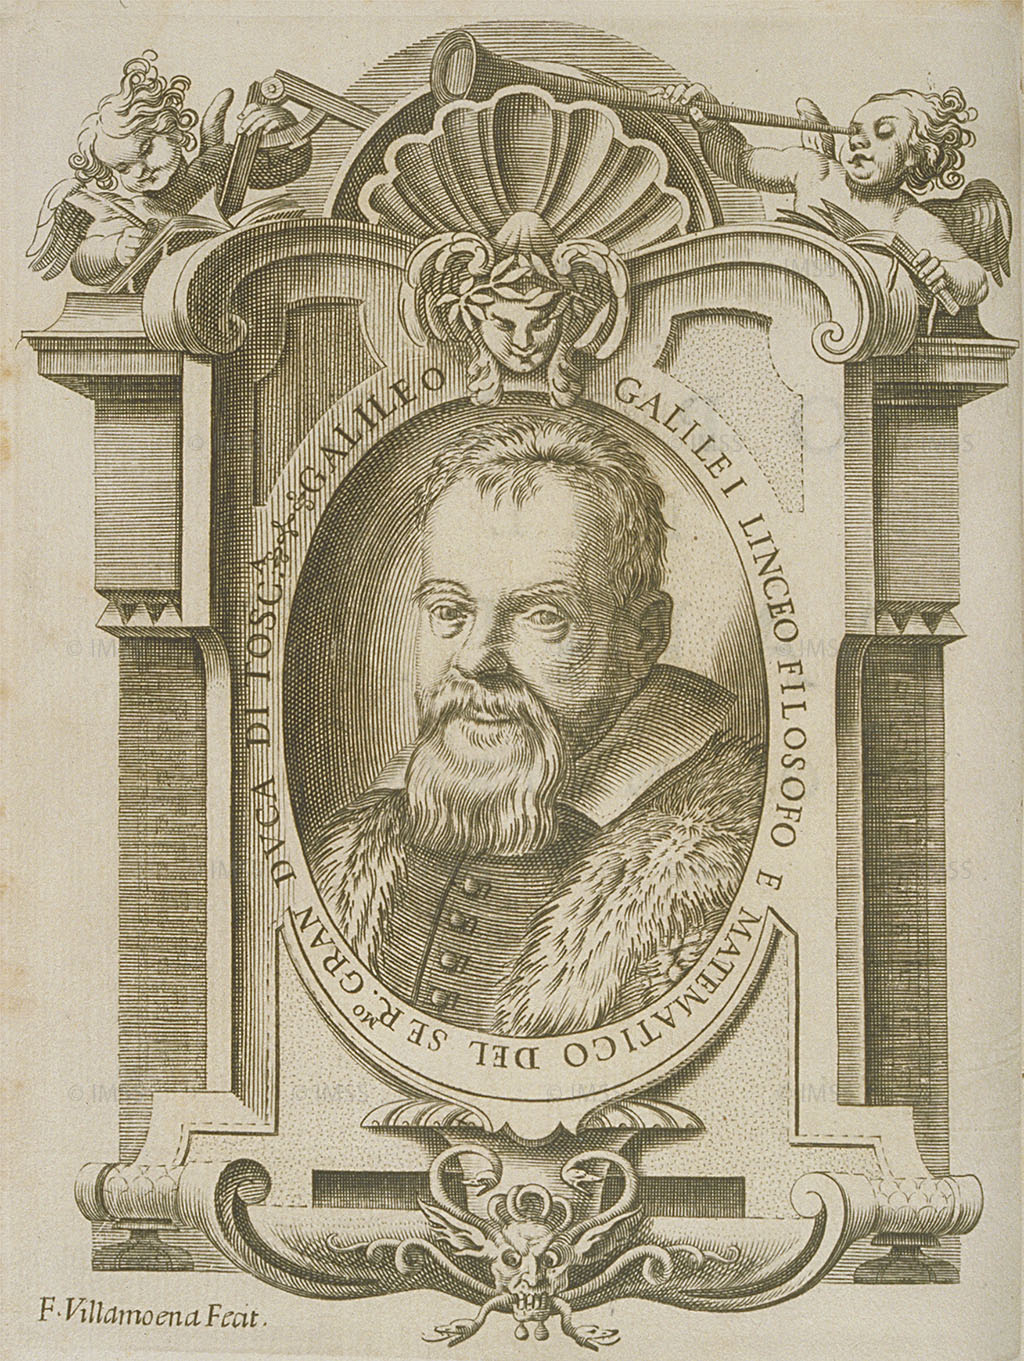 1623, Engraving, mm 205 x 150 (imprint), mm 212 x 150 (sheet), by: Galilei, Galileo, 1564-1642. Works of Galileo Galilei... in Bologna : per gli hh. of Dozza, 1656. -  antiporta vol.I, Institute and Museum of the History of Science, Florence, MED 1133